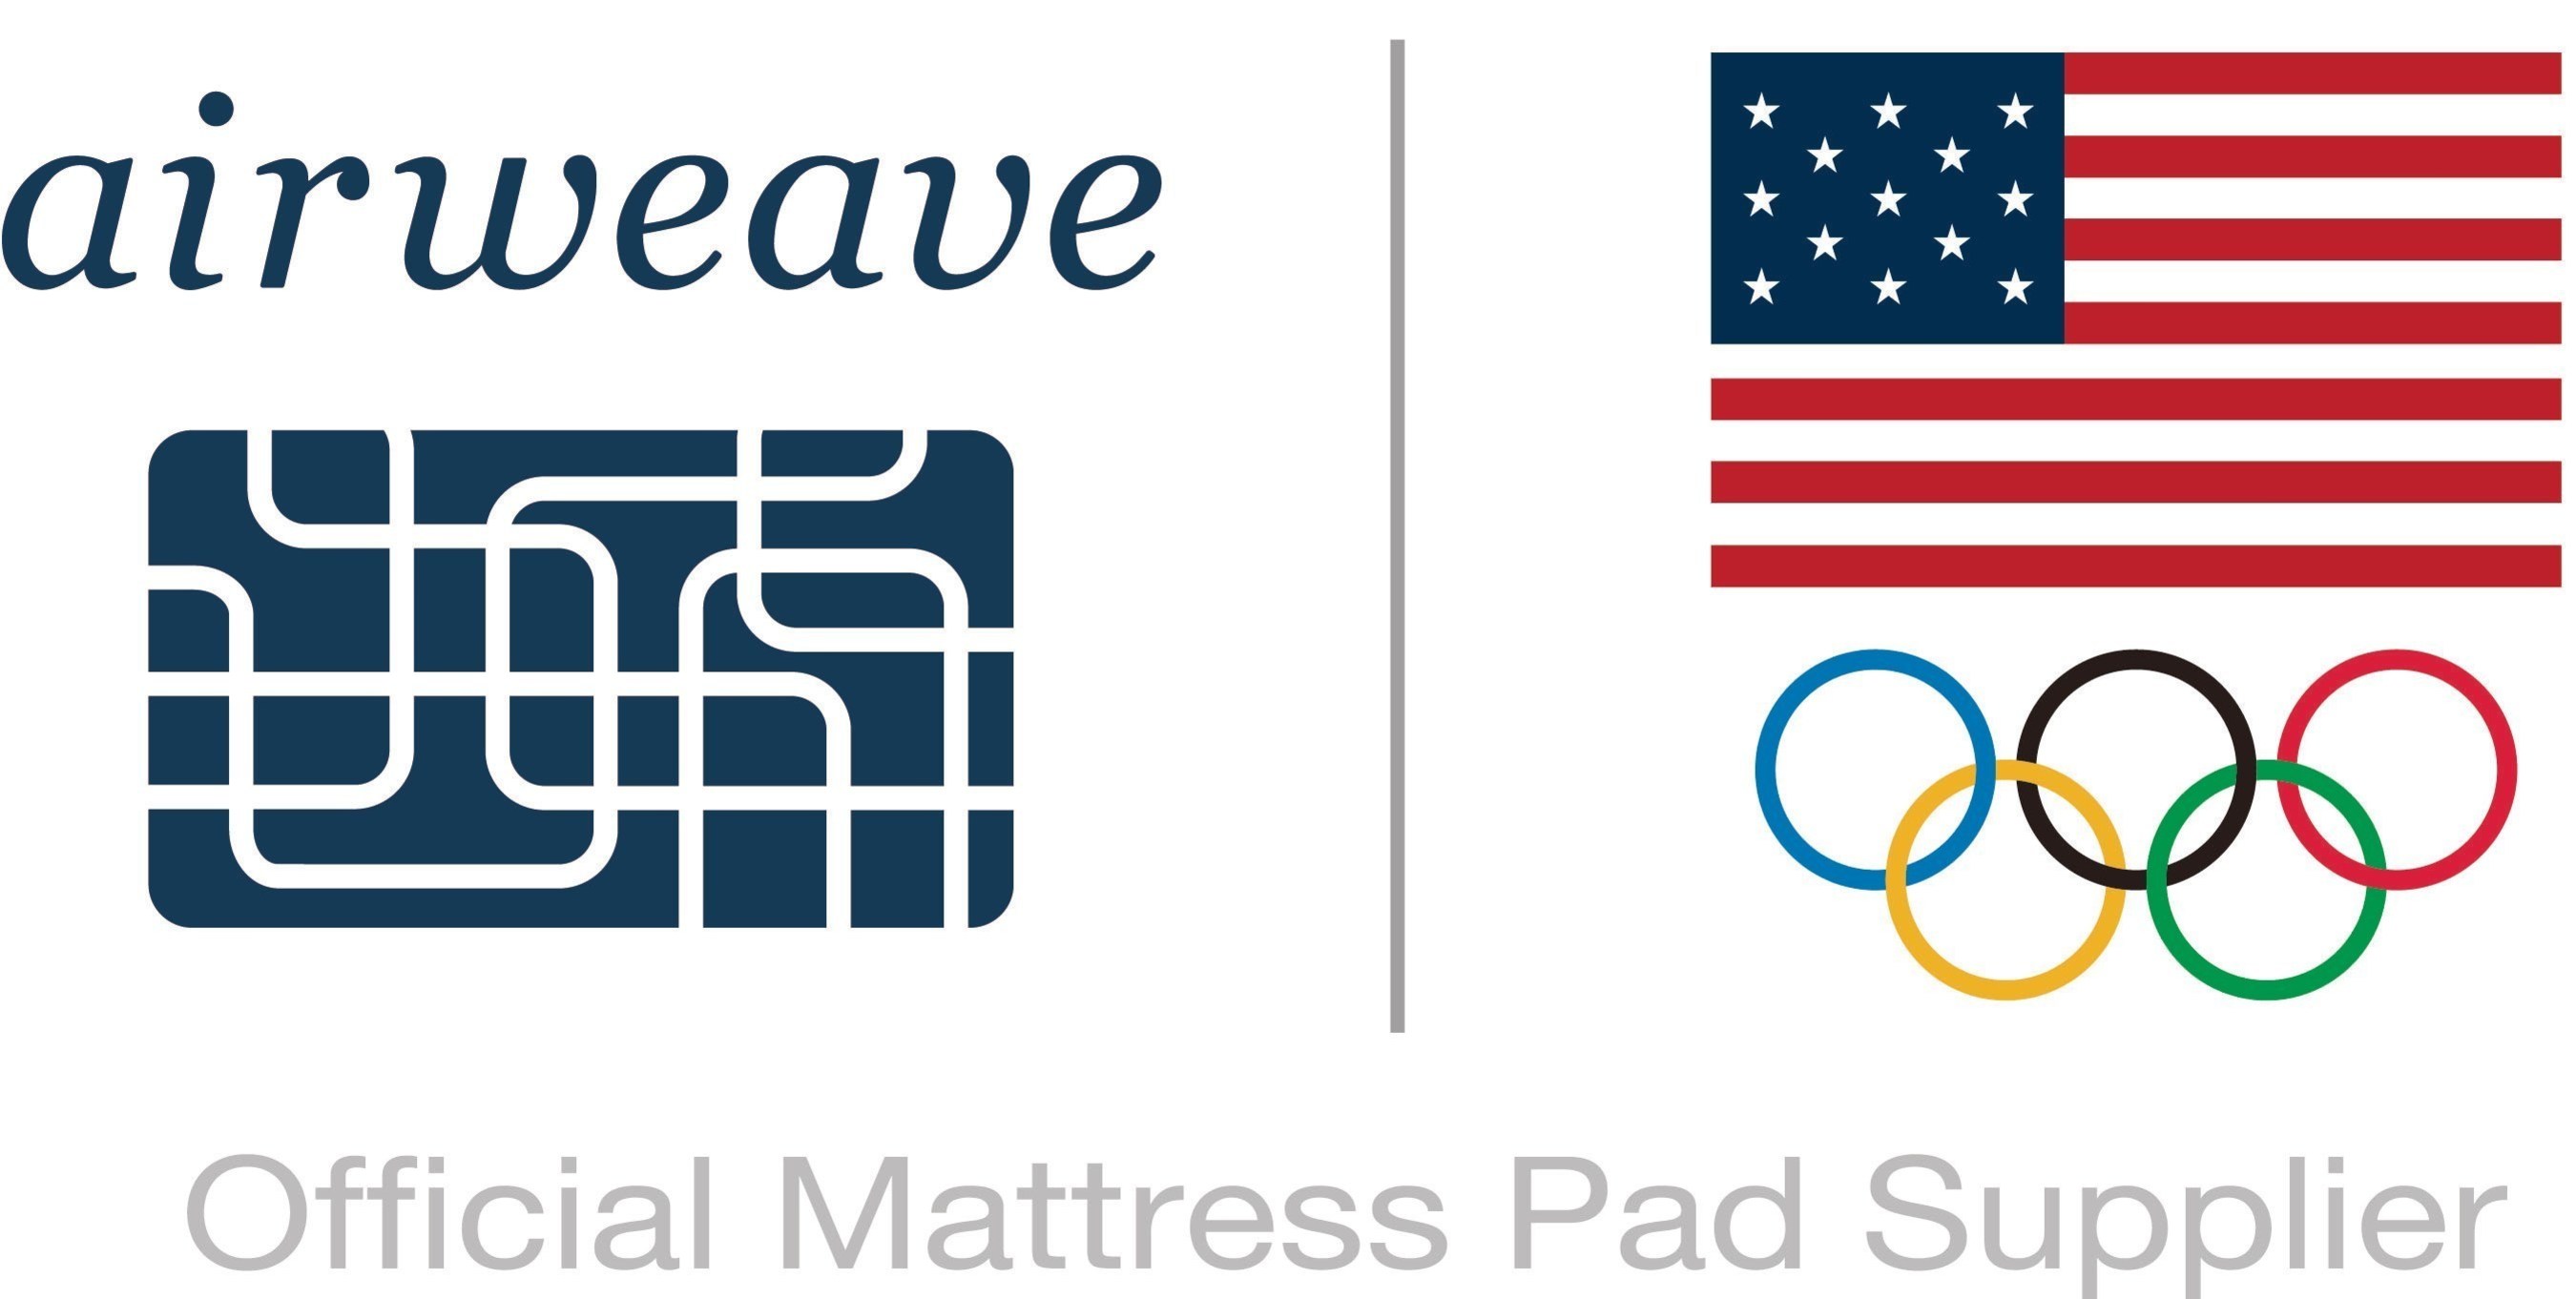 airweave is the official mattress pad supplier of the U.S. Olympic Committee